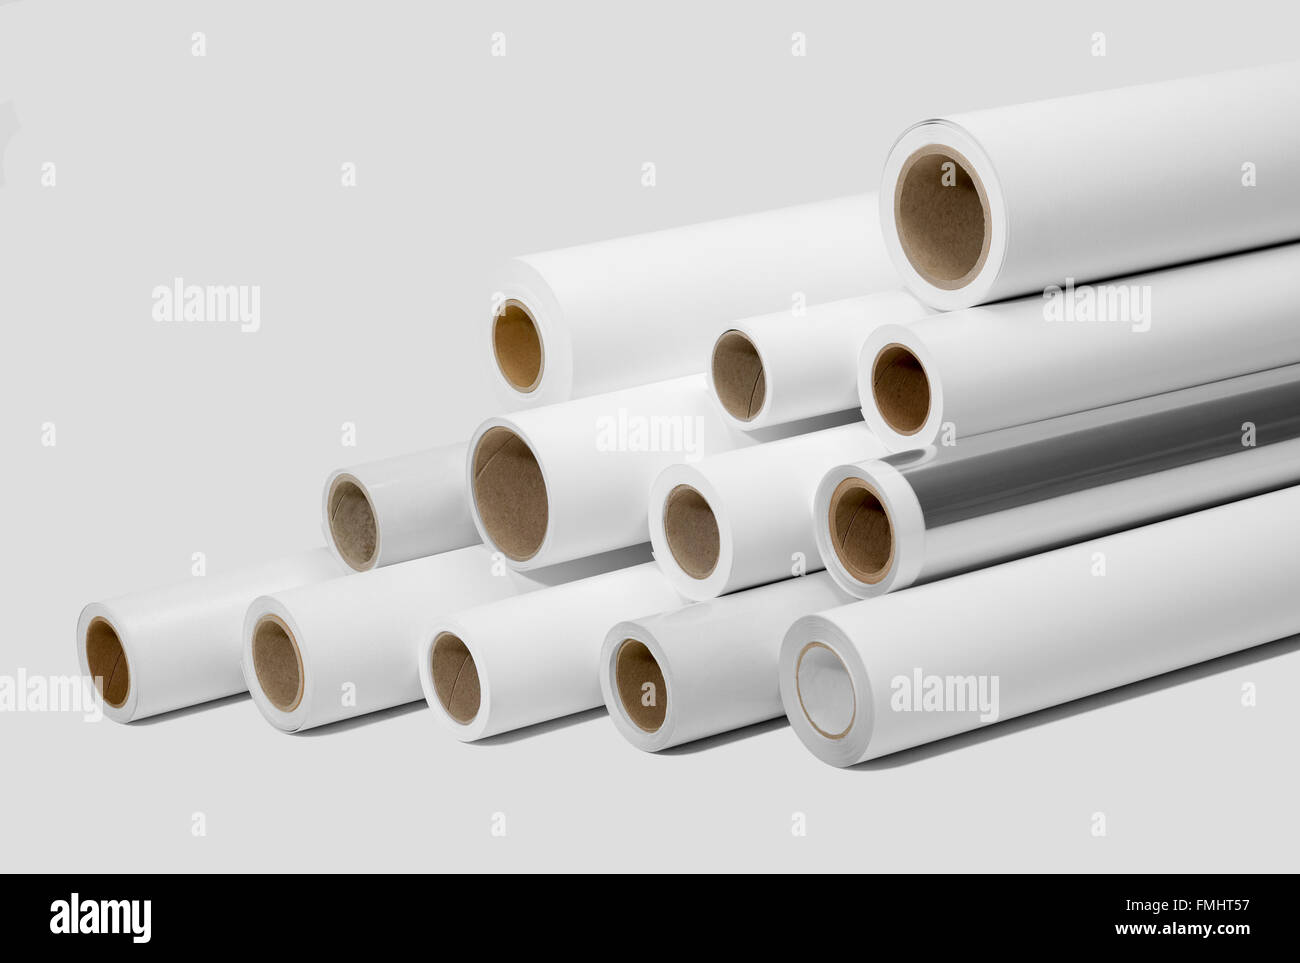 various print media rolls for wide-format printers in light grey back Stock Photo